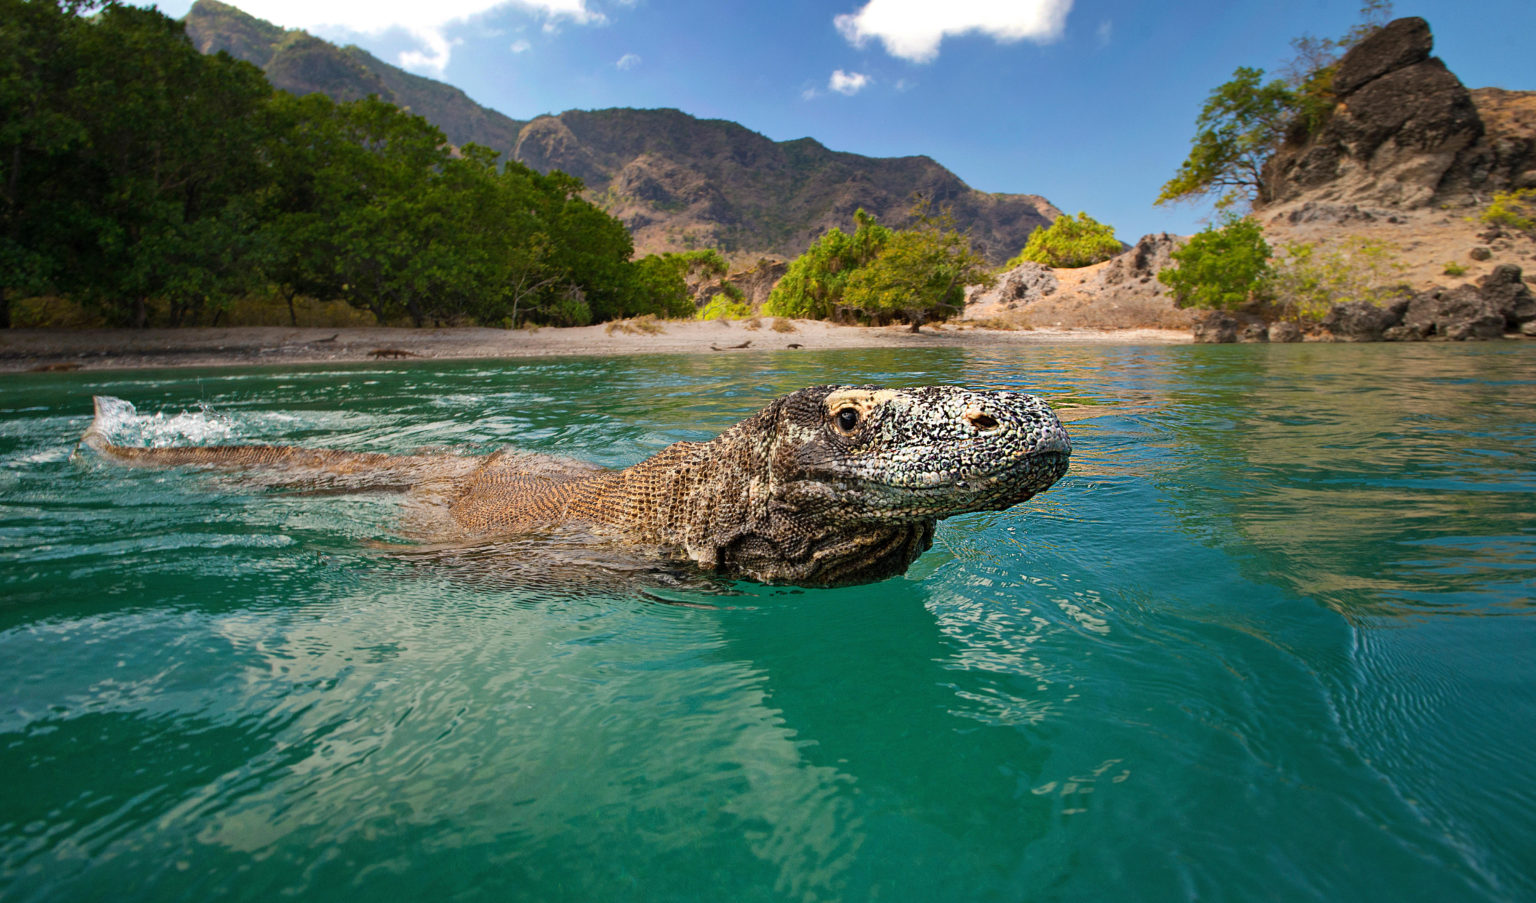 A Komodo dragon swims through shallow coastal water with a background of tropical islands